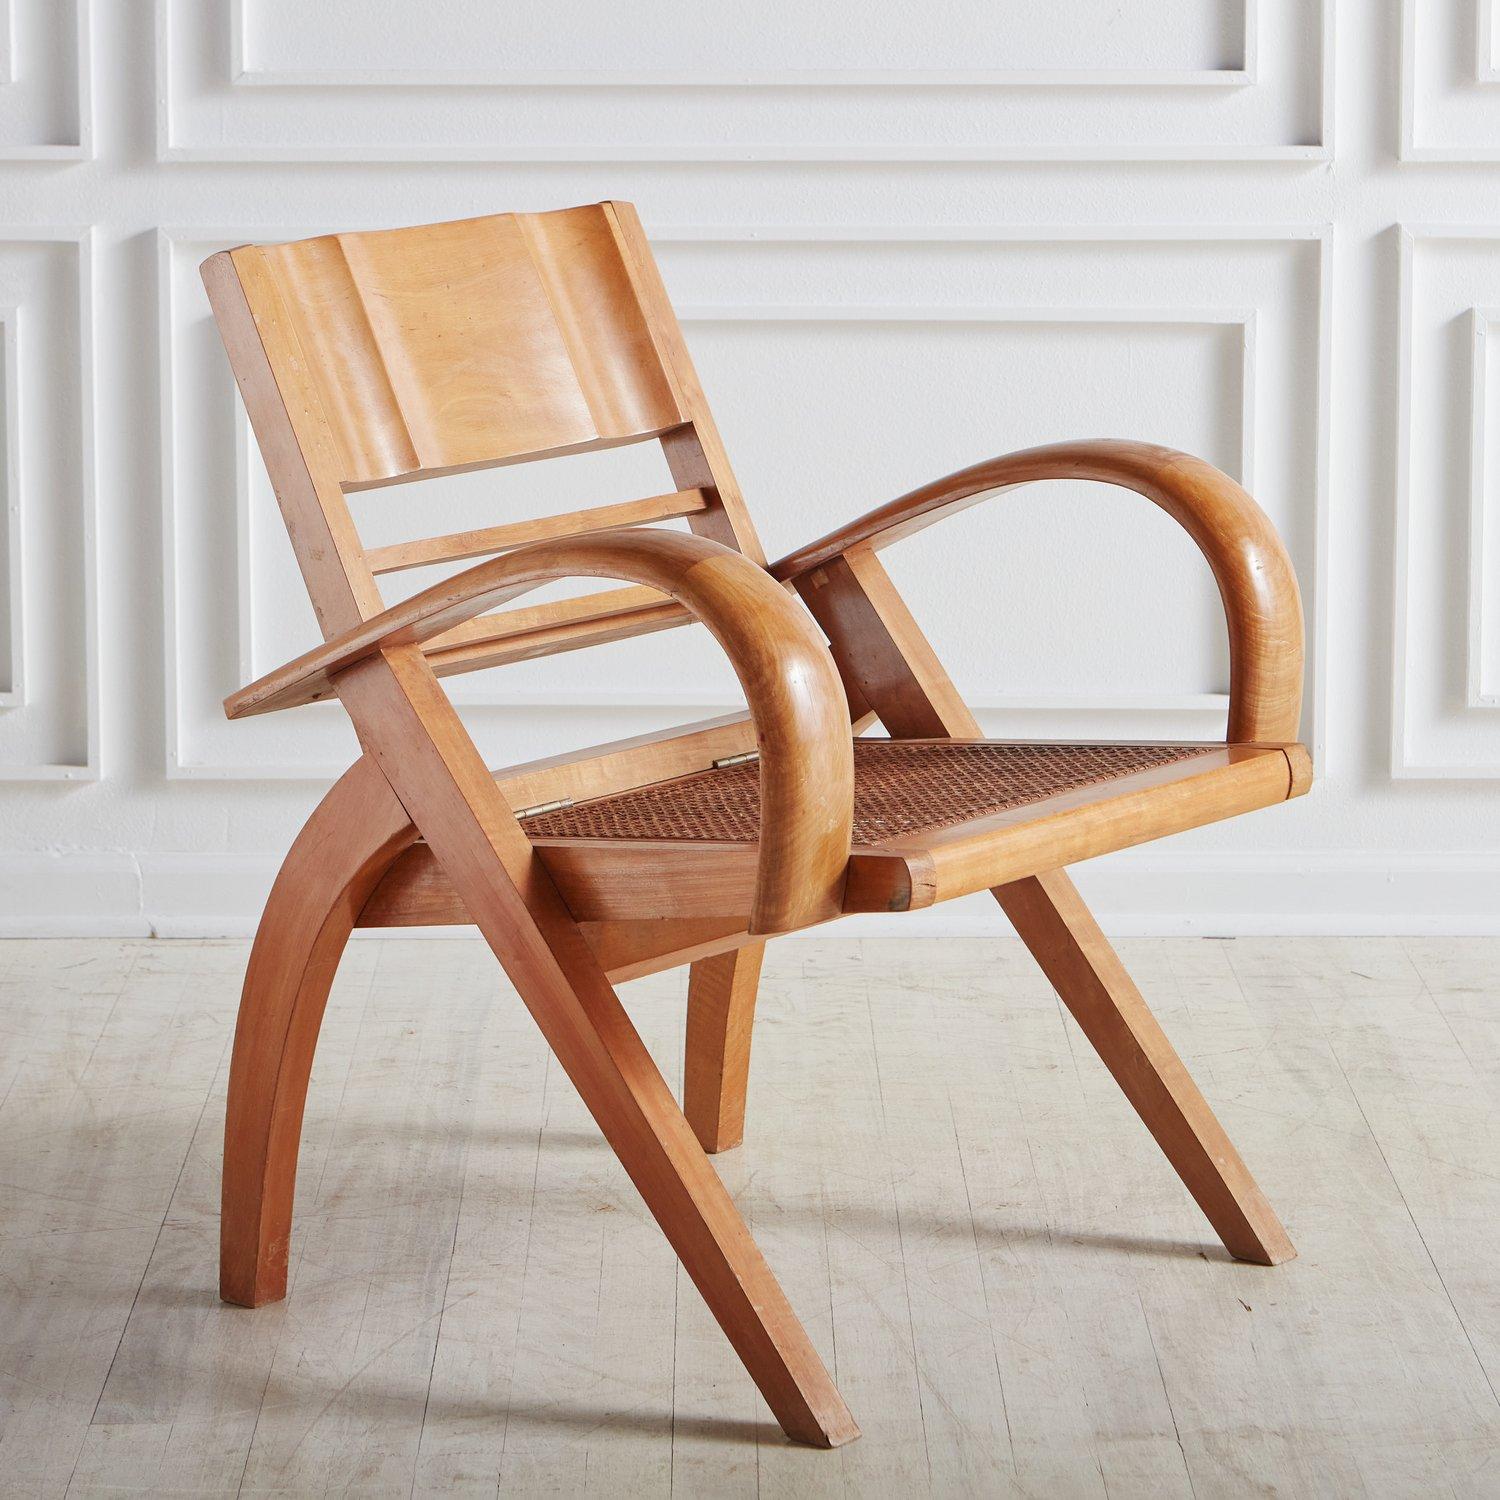 An Art Deco style folding chair sourced in France. This chair has a maple wood frame with elegant curved legs and dramatic bentwood arms. It has a cane seat and the back is on hinges and folds down onto the seat making it compact. This chair